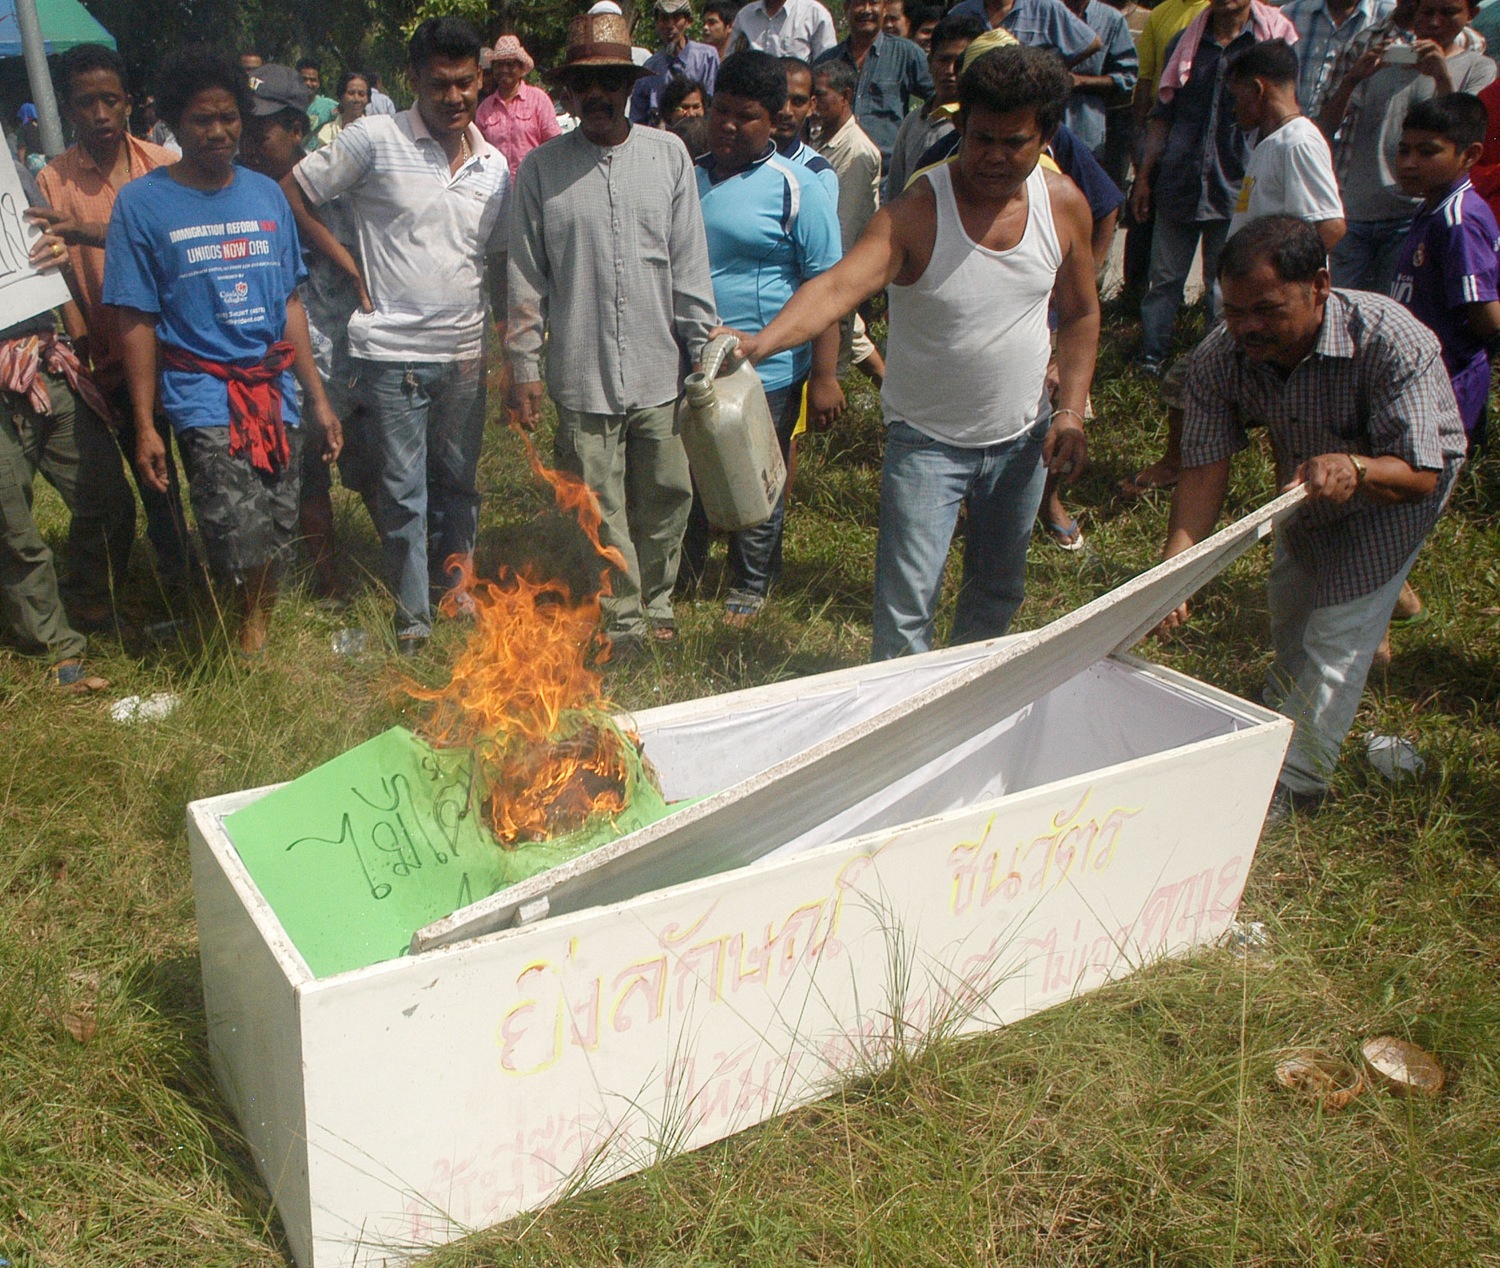 Thai rubber farmers burn a coffin during a protest in Nakorn Si Thammarat province, southern Thailand. Photo: AP